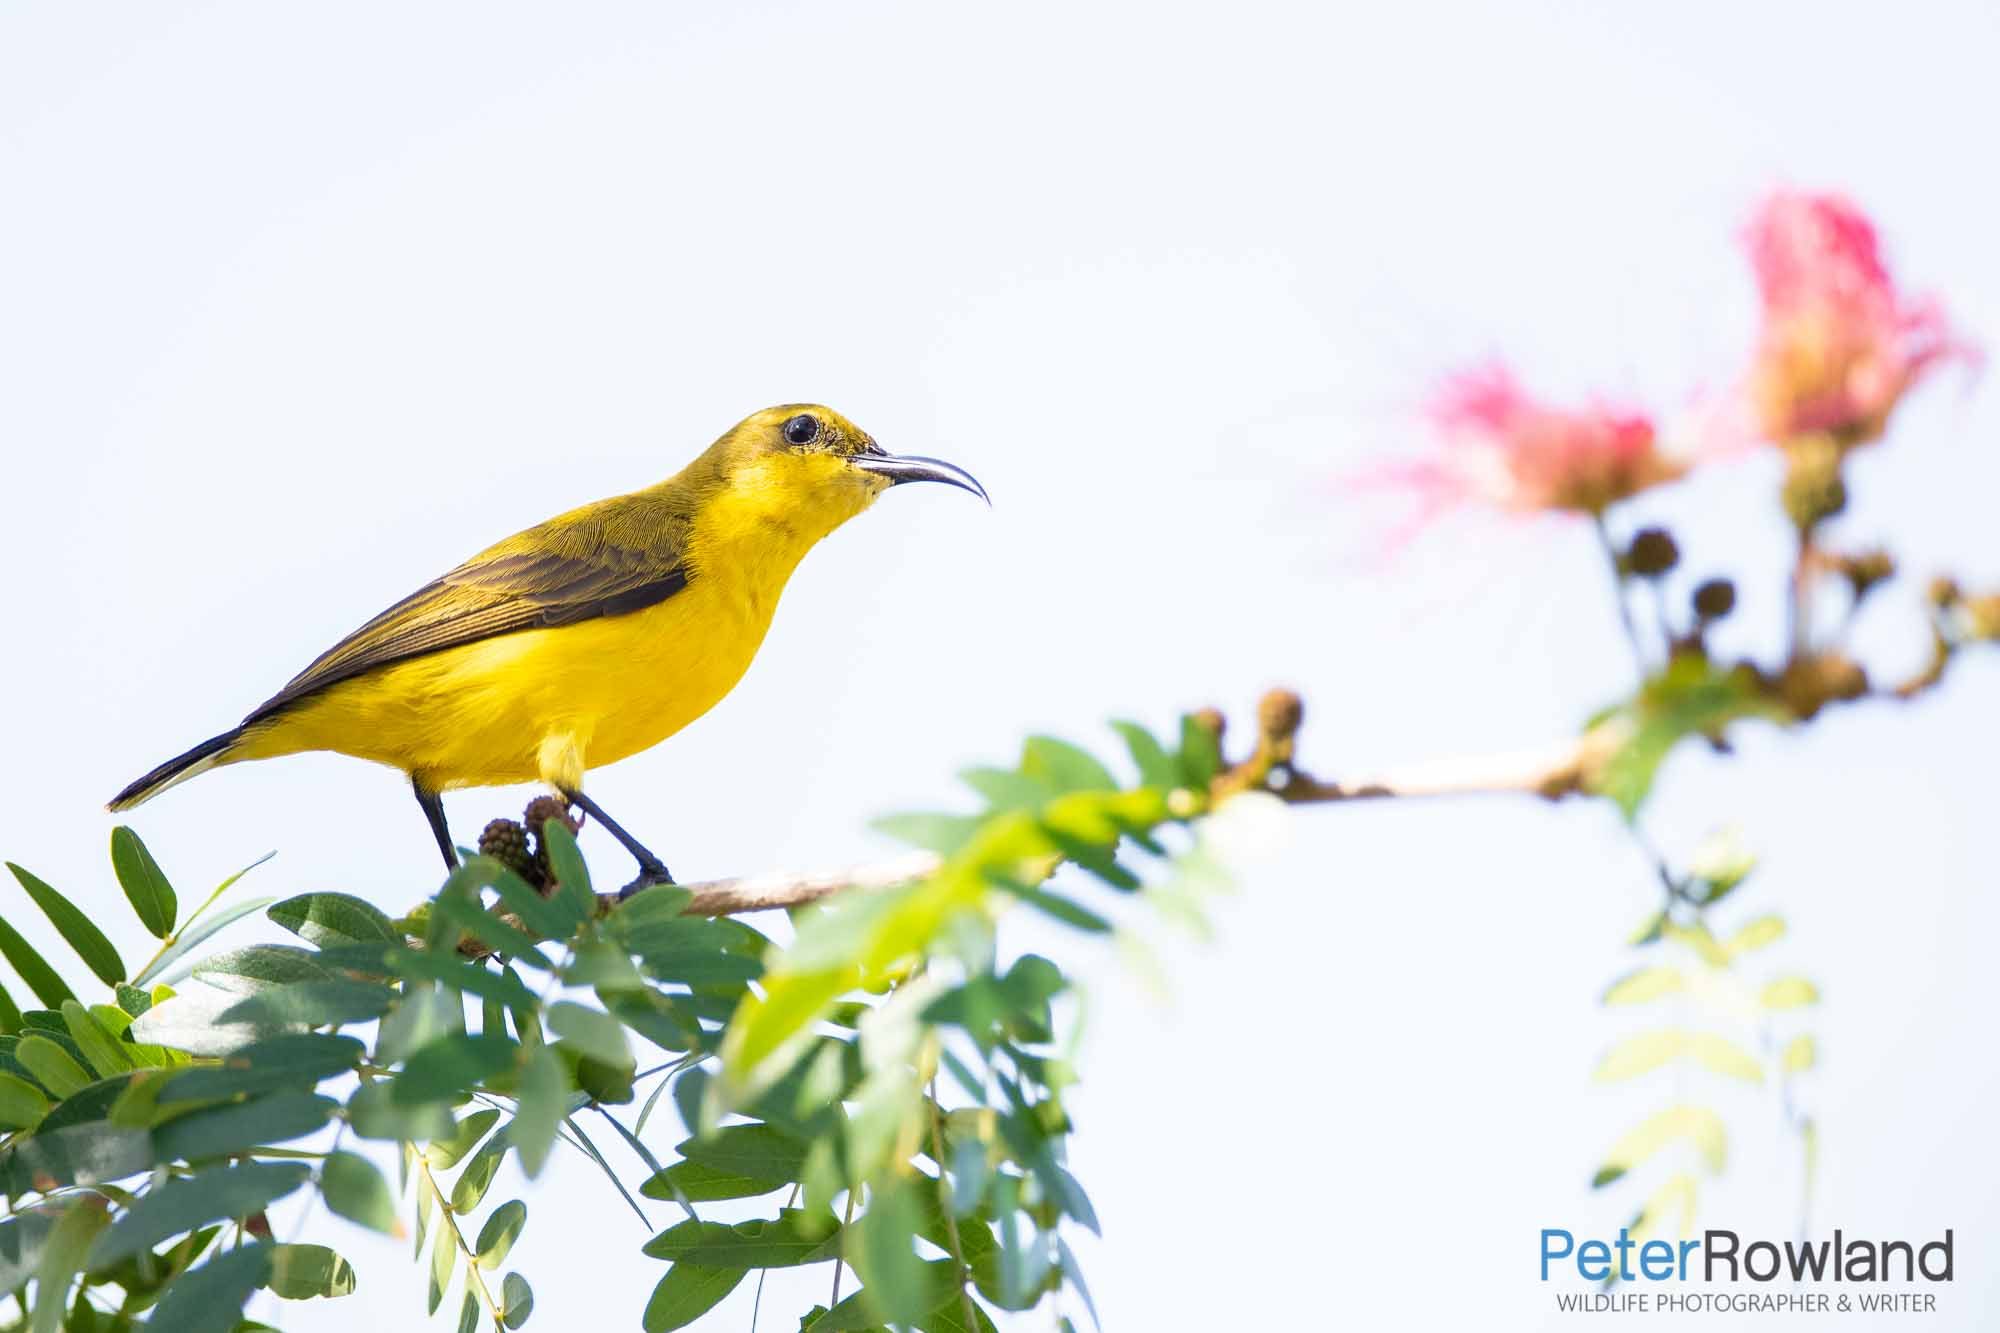 Female Olive-backed Sunbird perched on small branch amongst green and yellow leaves